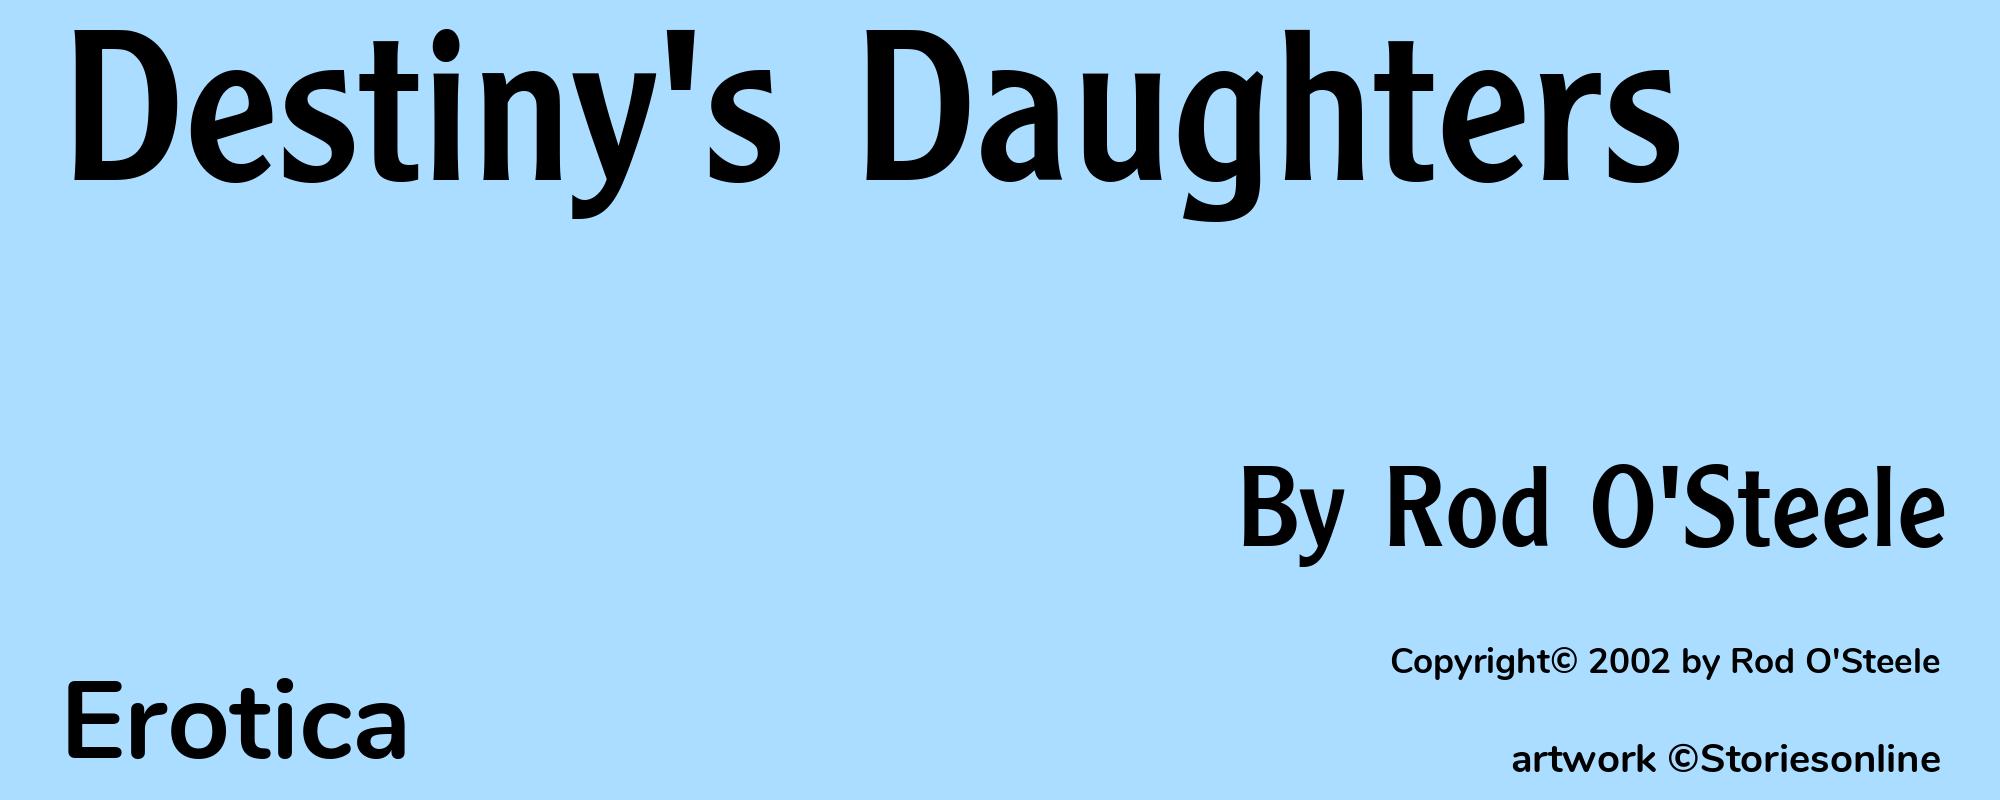 Destiny's Daughters - Cover